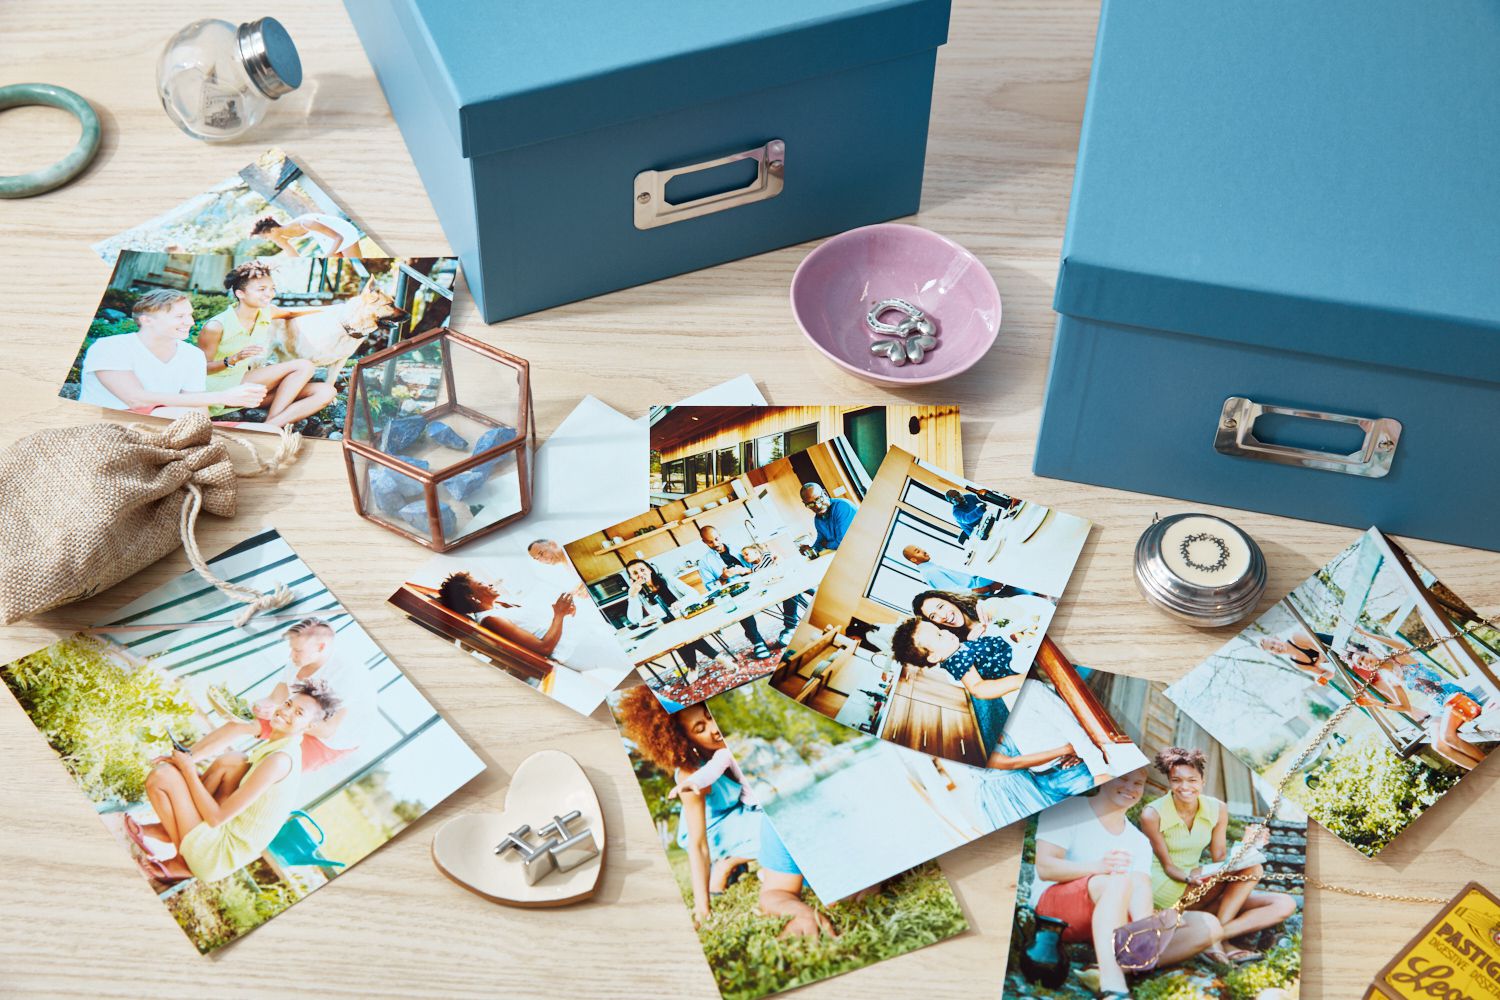 The Best Tips for Getting Rid of Sentimental Clutter